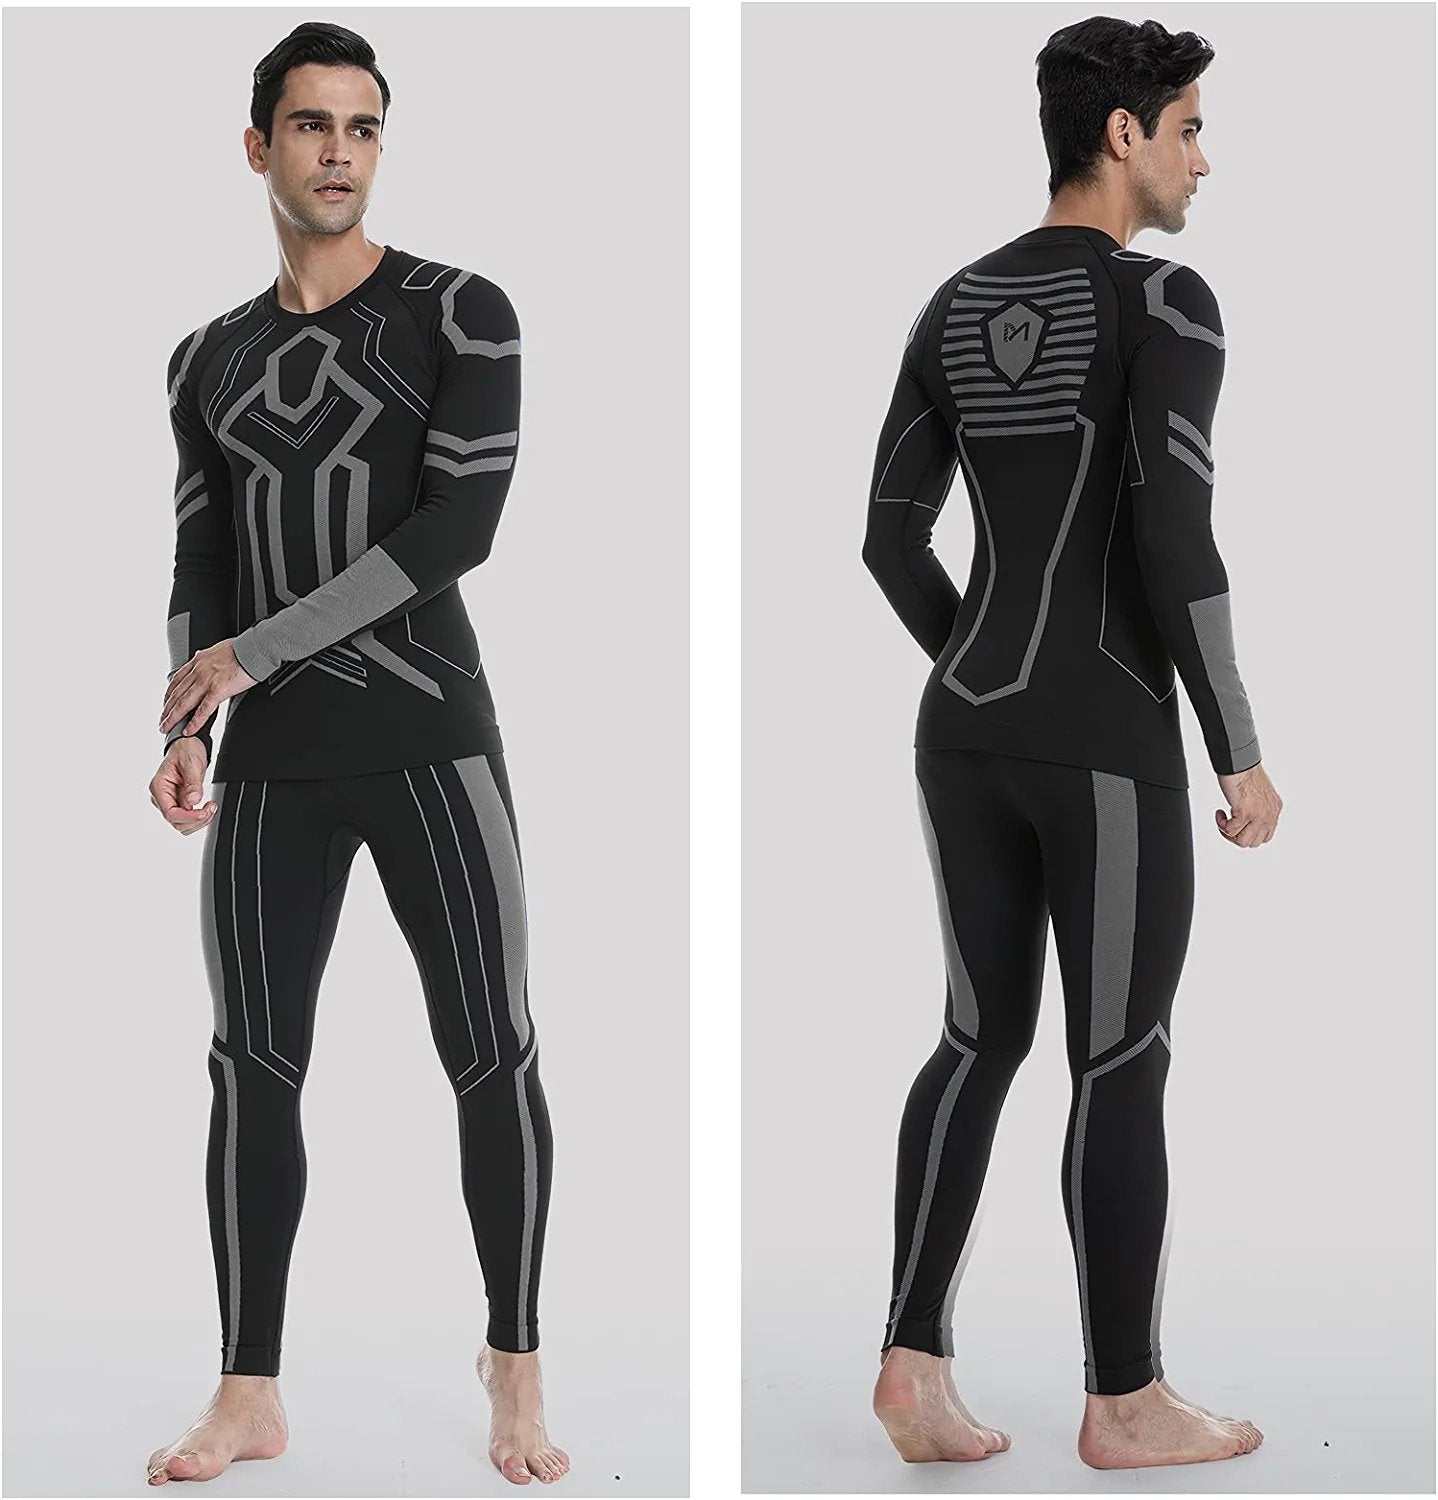 NEW MENS THERMAL ALL IN ONE UNDERWEAR SET BASELAYER ZIP SKI BODY JUMPSUITS  S-XXL